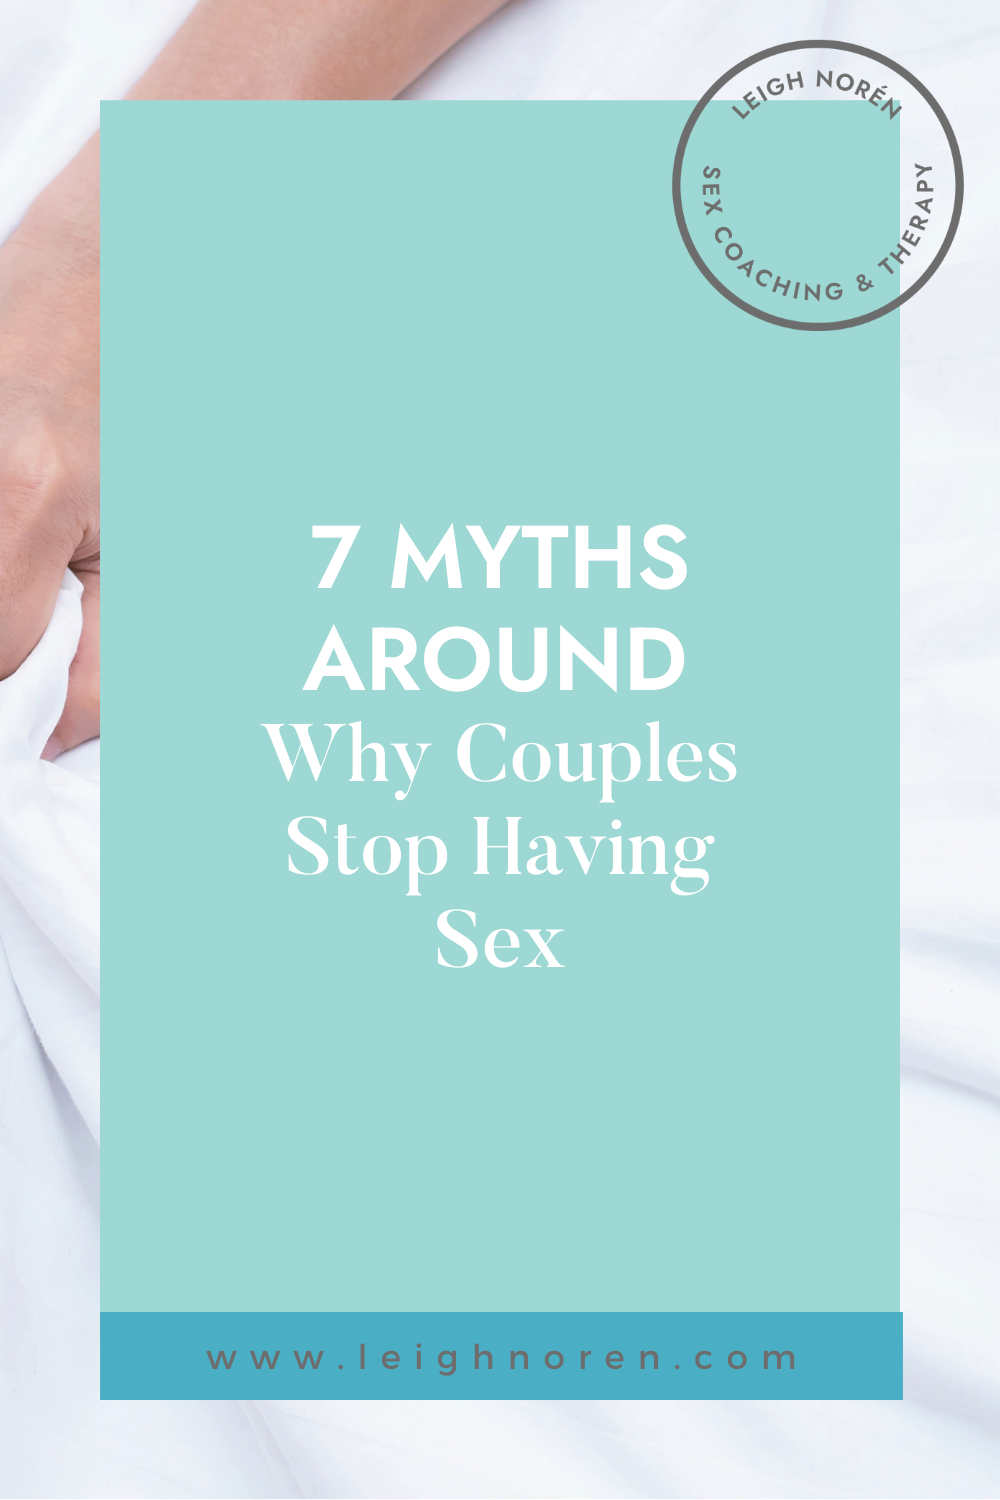 7 Myths Around Why Couples Stop Having Sex